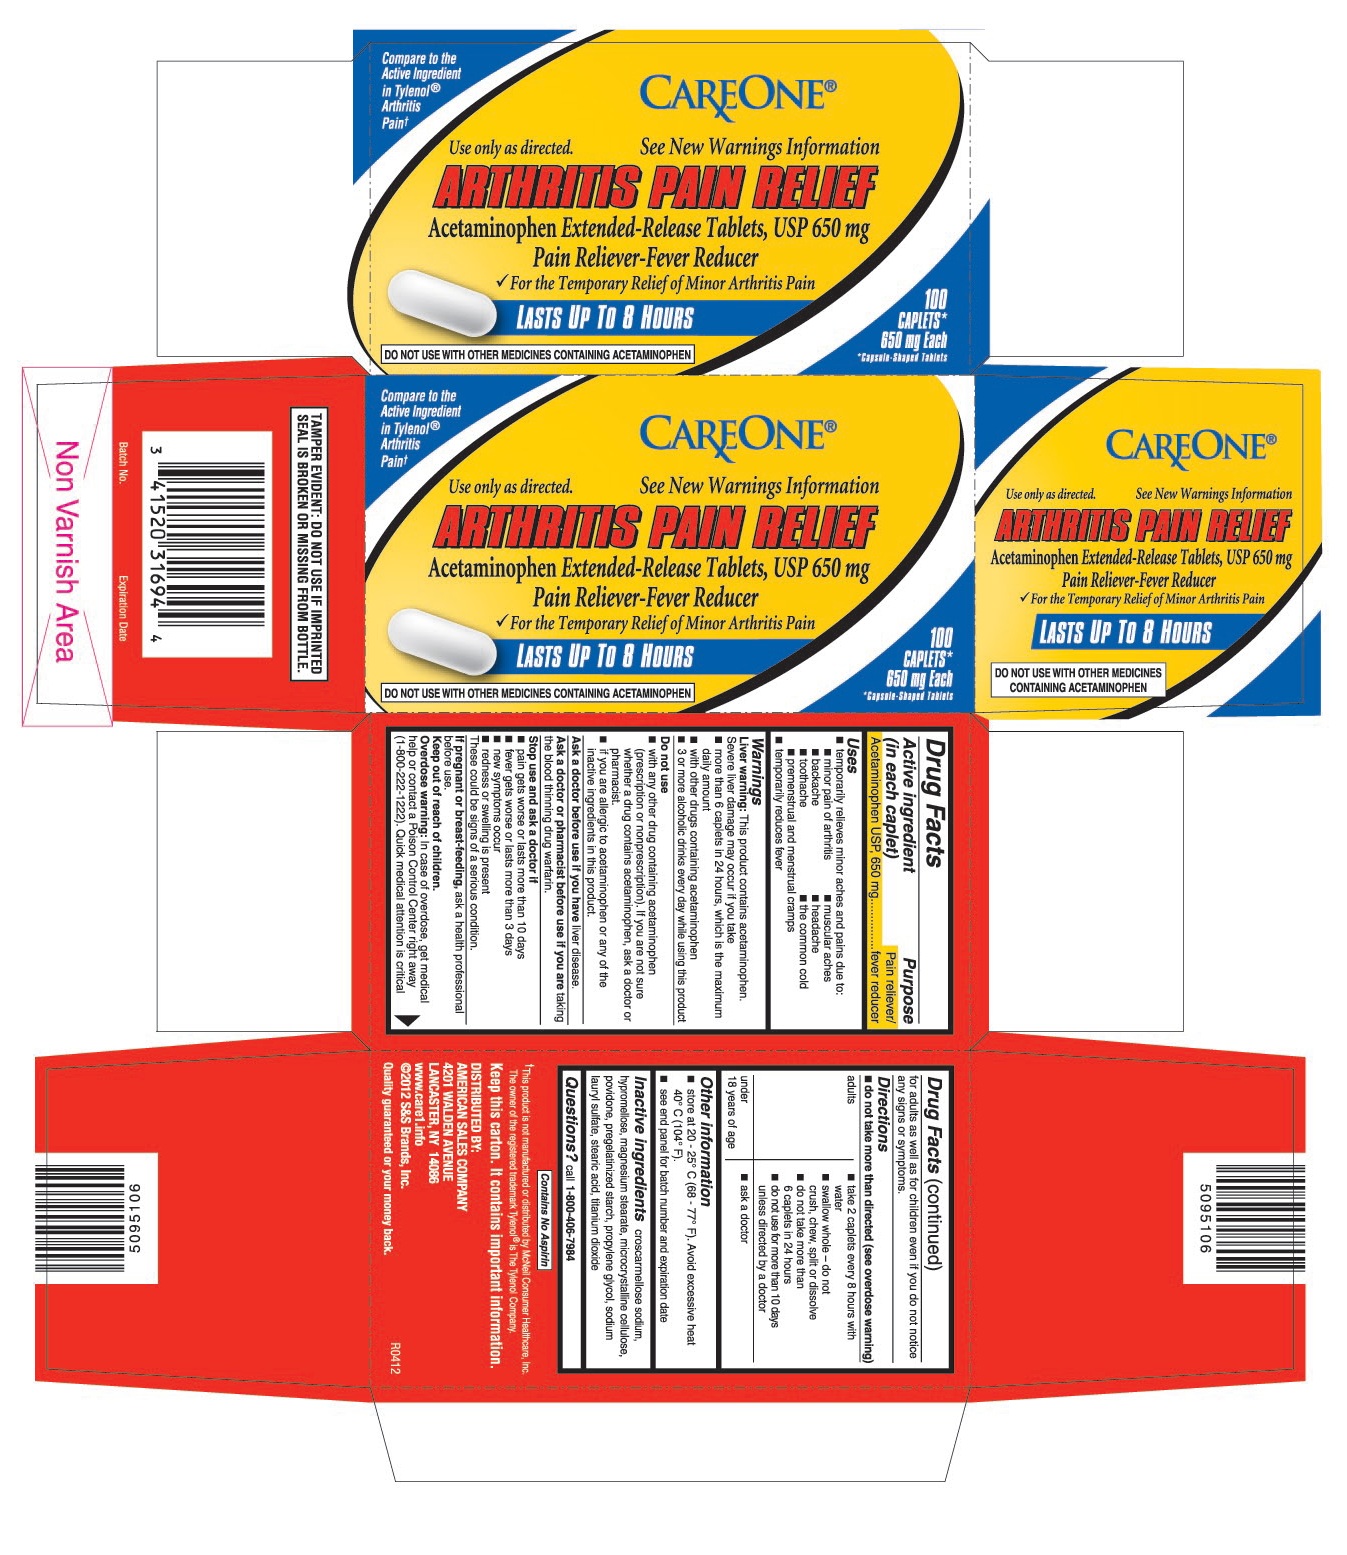 This is the 100 count bottle carton label for Careone Acetaminophen extended-release tablets, USP 650 mg.